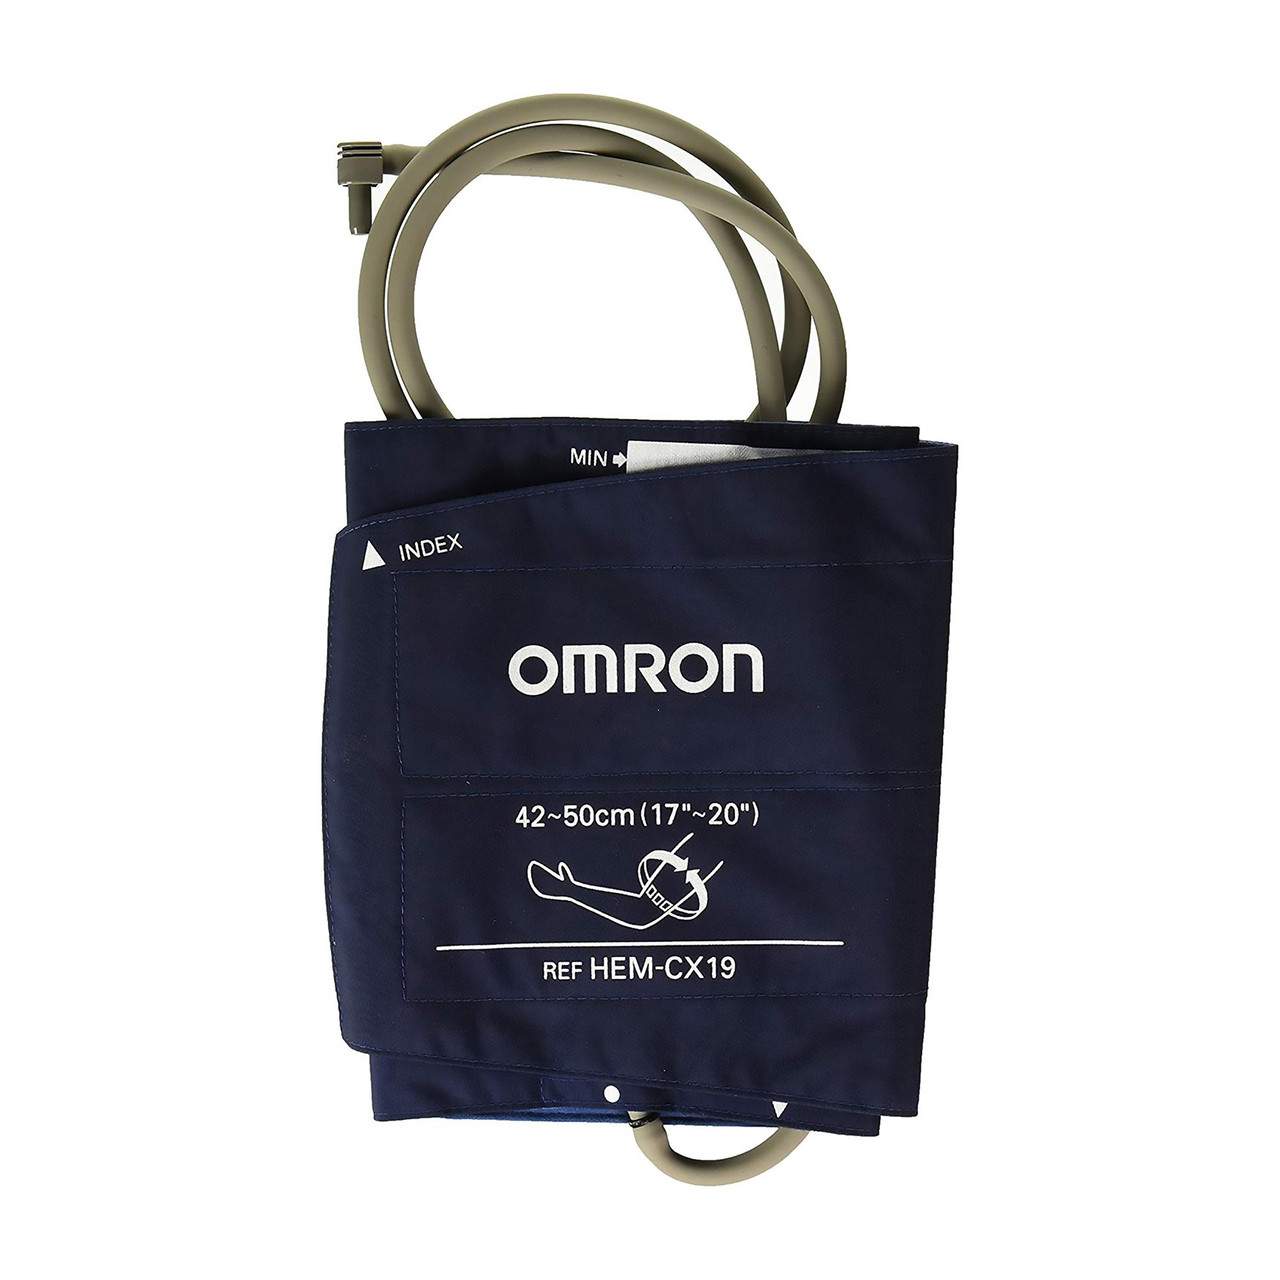 Omron Stand for HEM-907XL